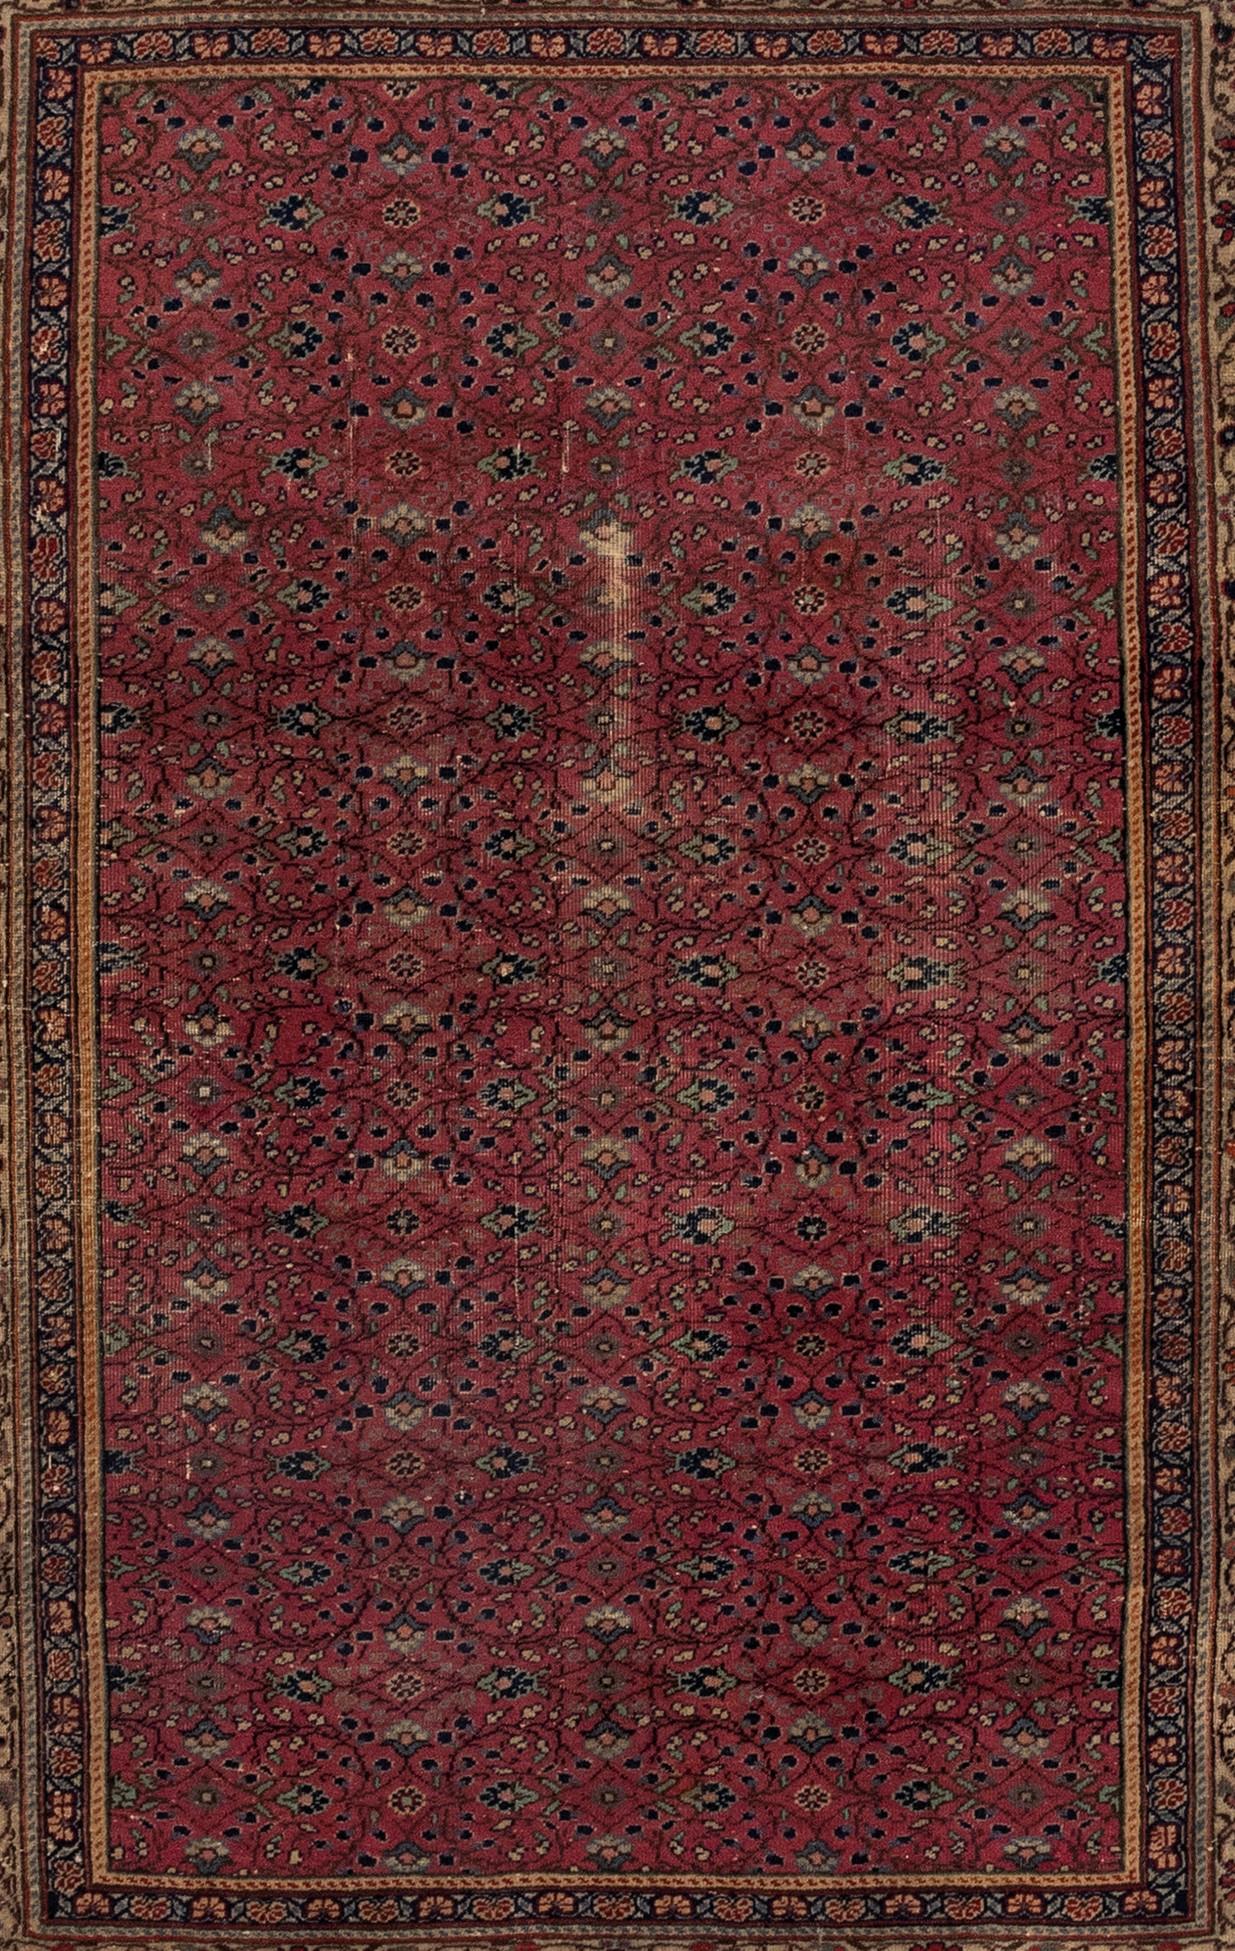 This exquisite Victorian rug from the 19th century boasts an awe-inspiring botanical design on a sumptuous burgundy wool background. Its hand-knotted craftsmanship makes it an ideal choice for larger areas, while its timeless elegance perfectly